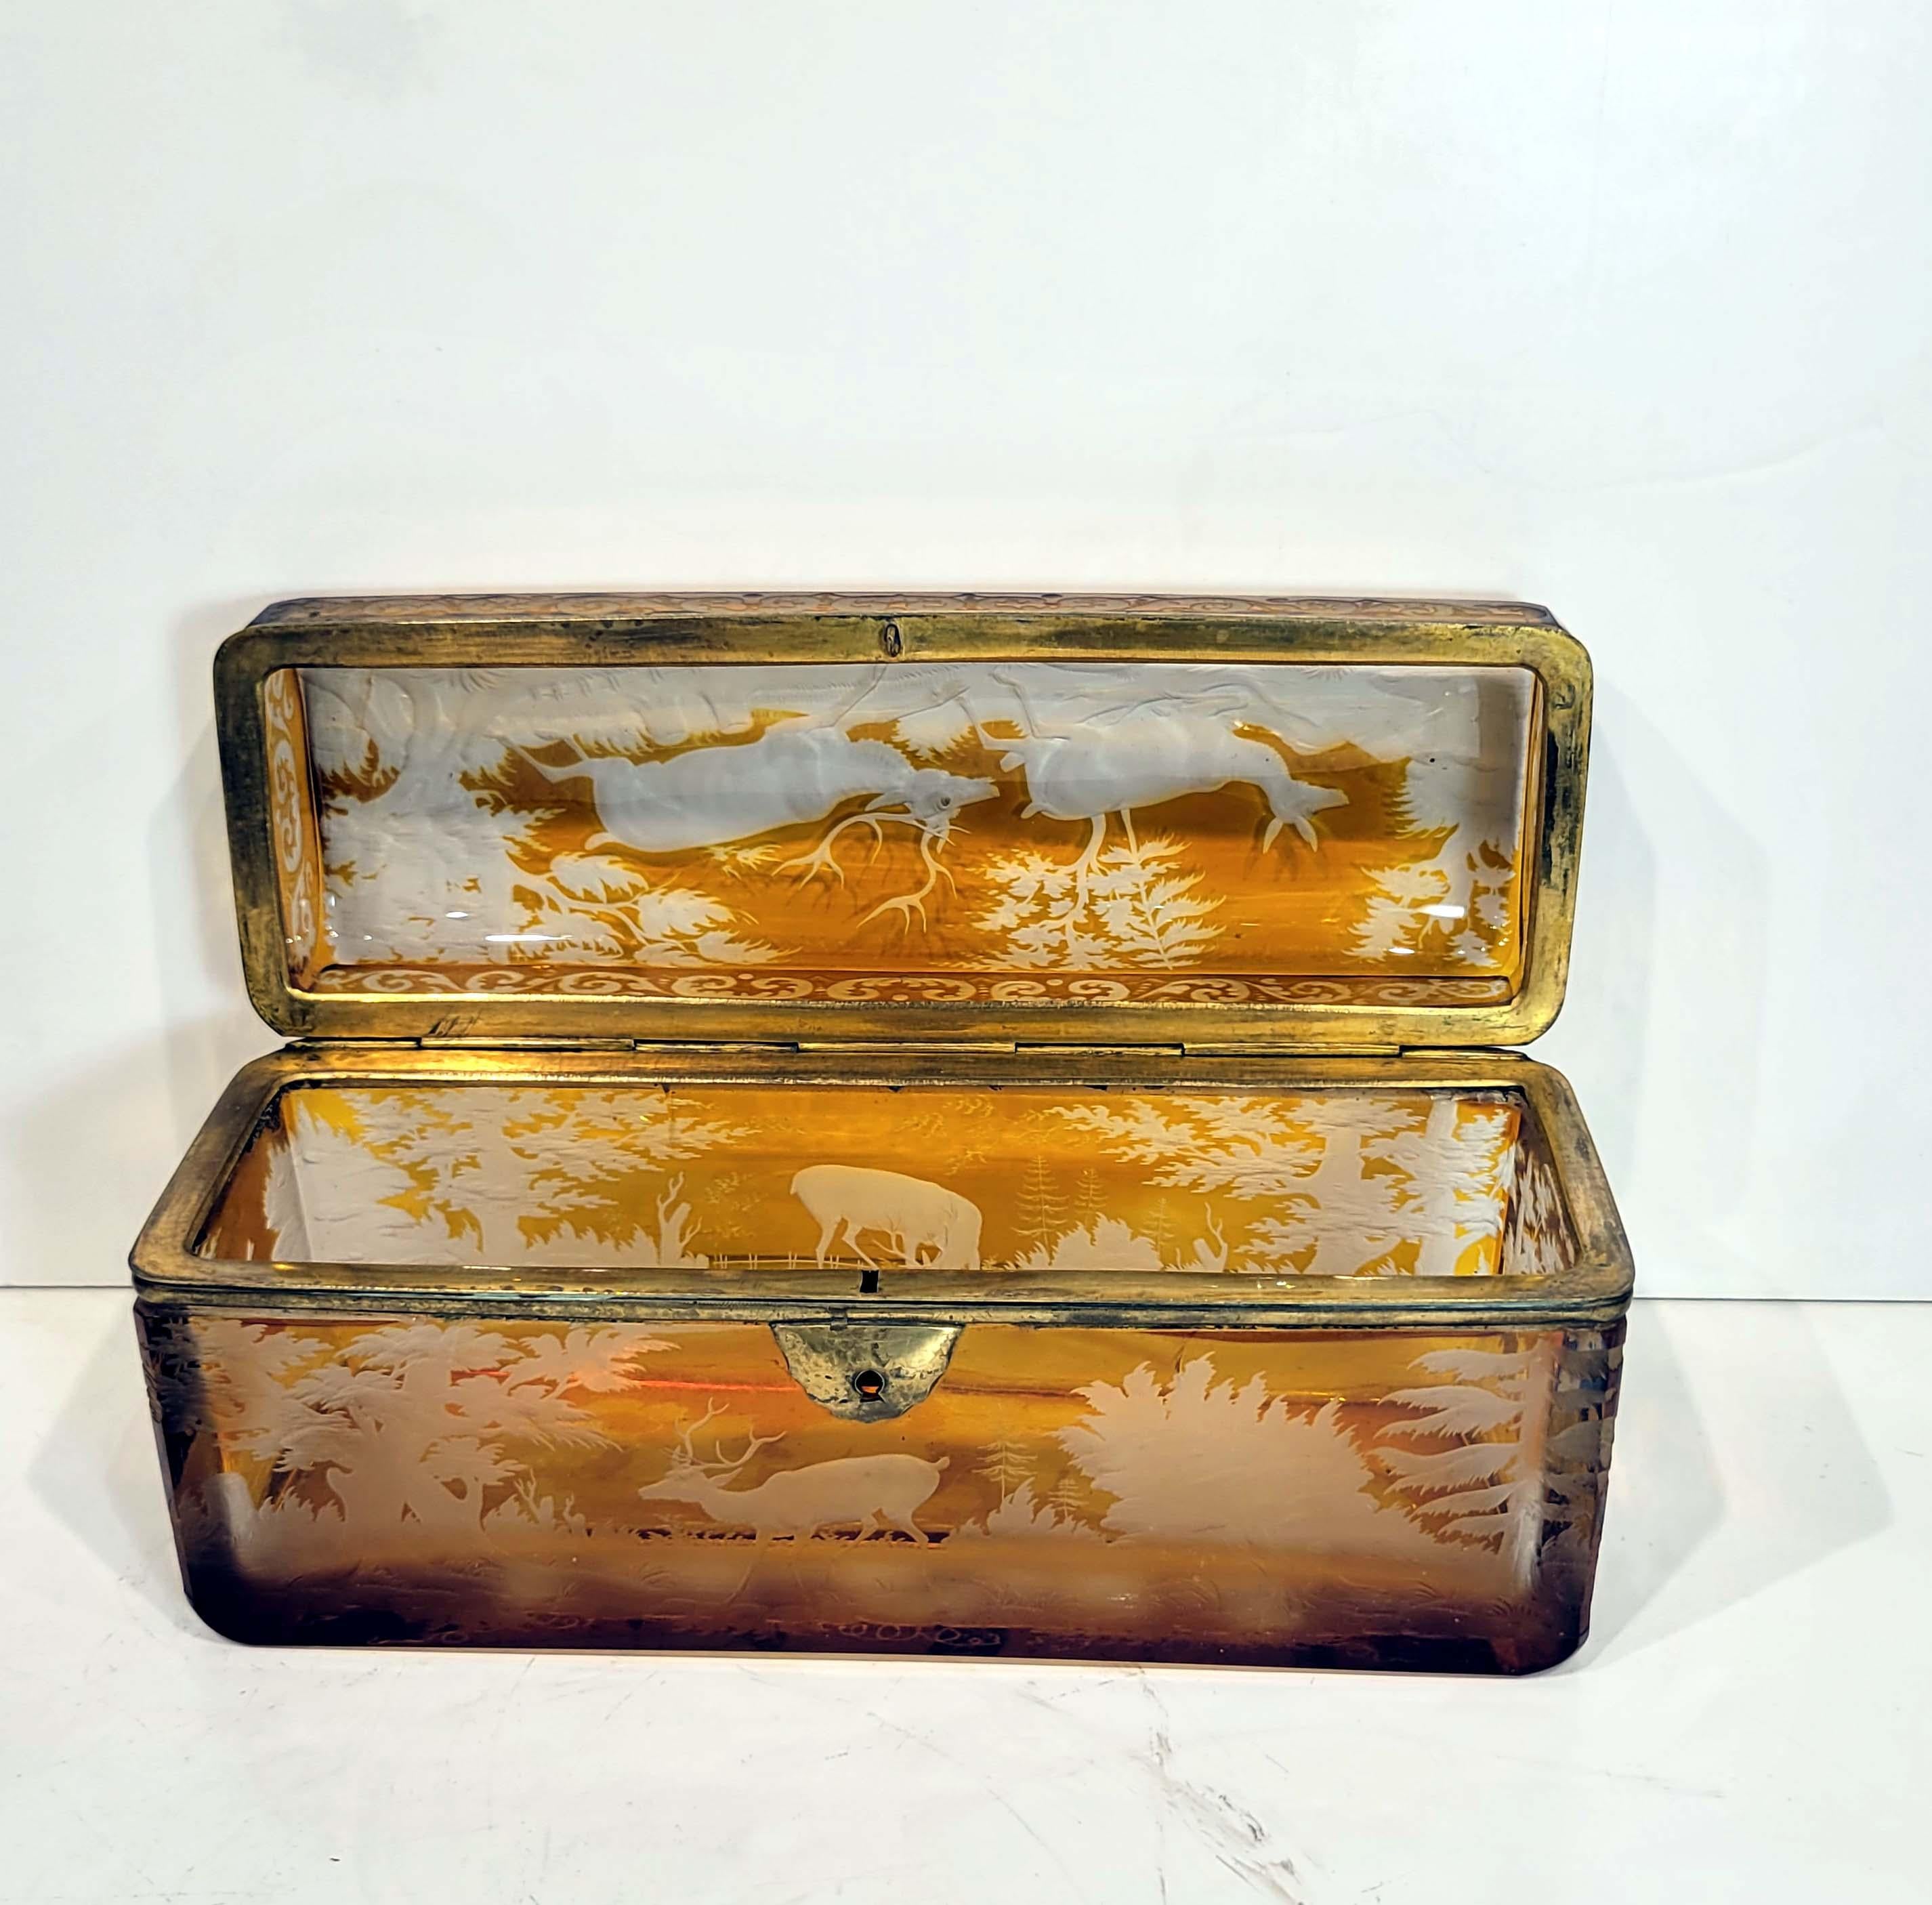 Hand-Carved Large Antique Bohemian Intaglio Cut Amber Glass Jewelry Casket